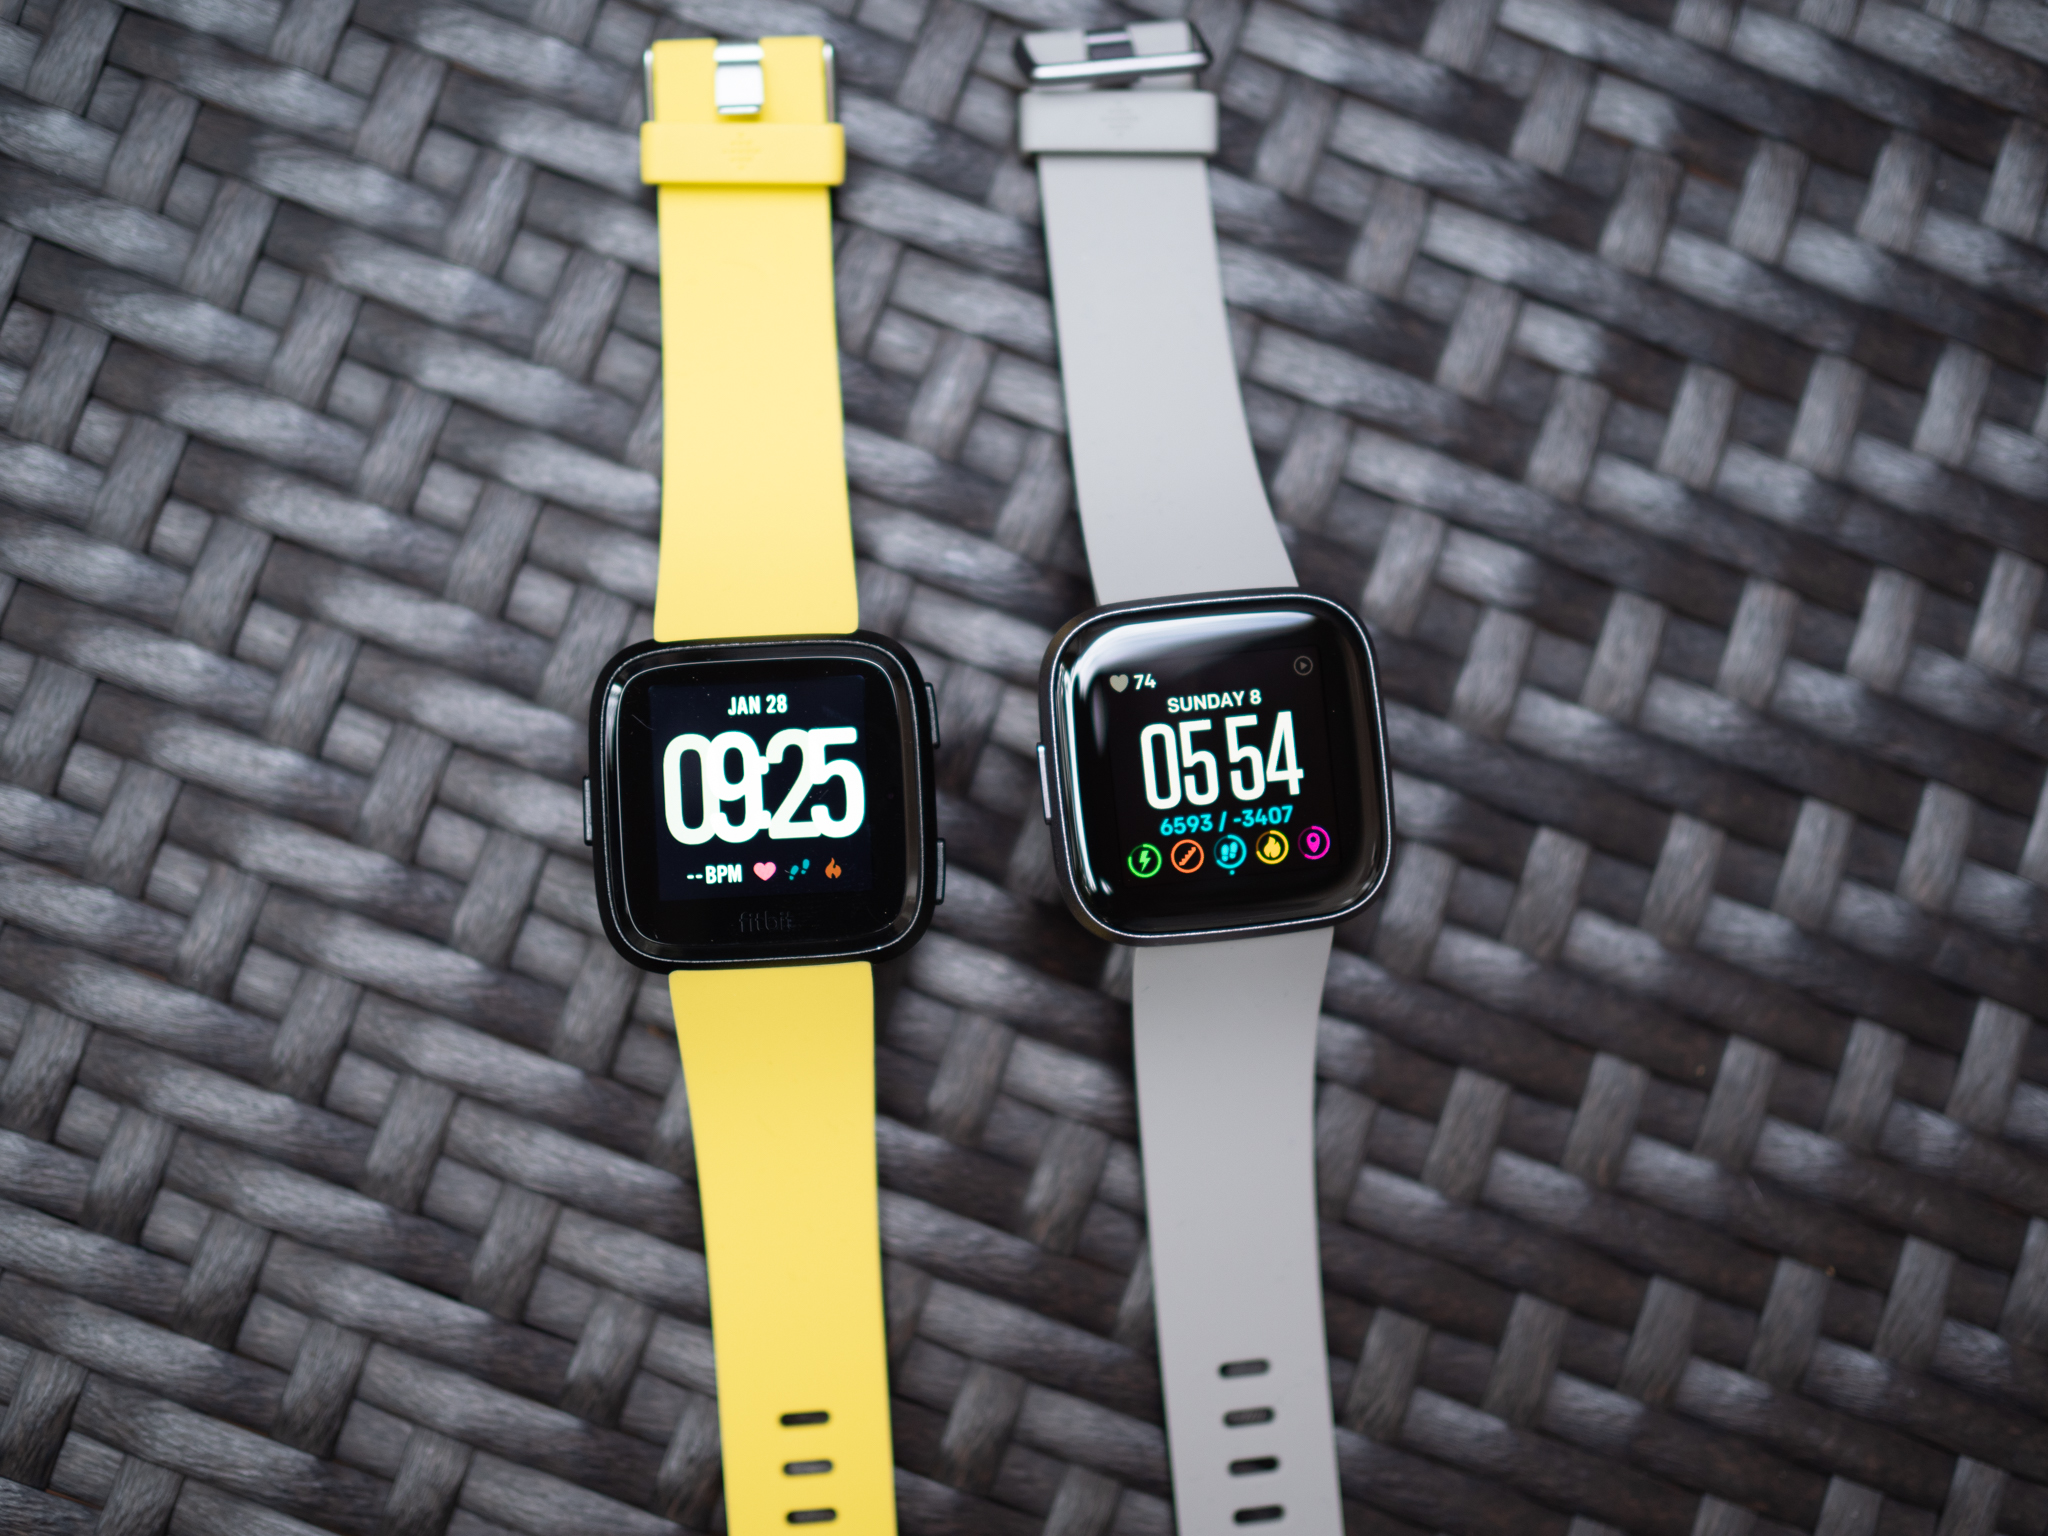 differences between versa and versa 2